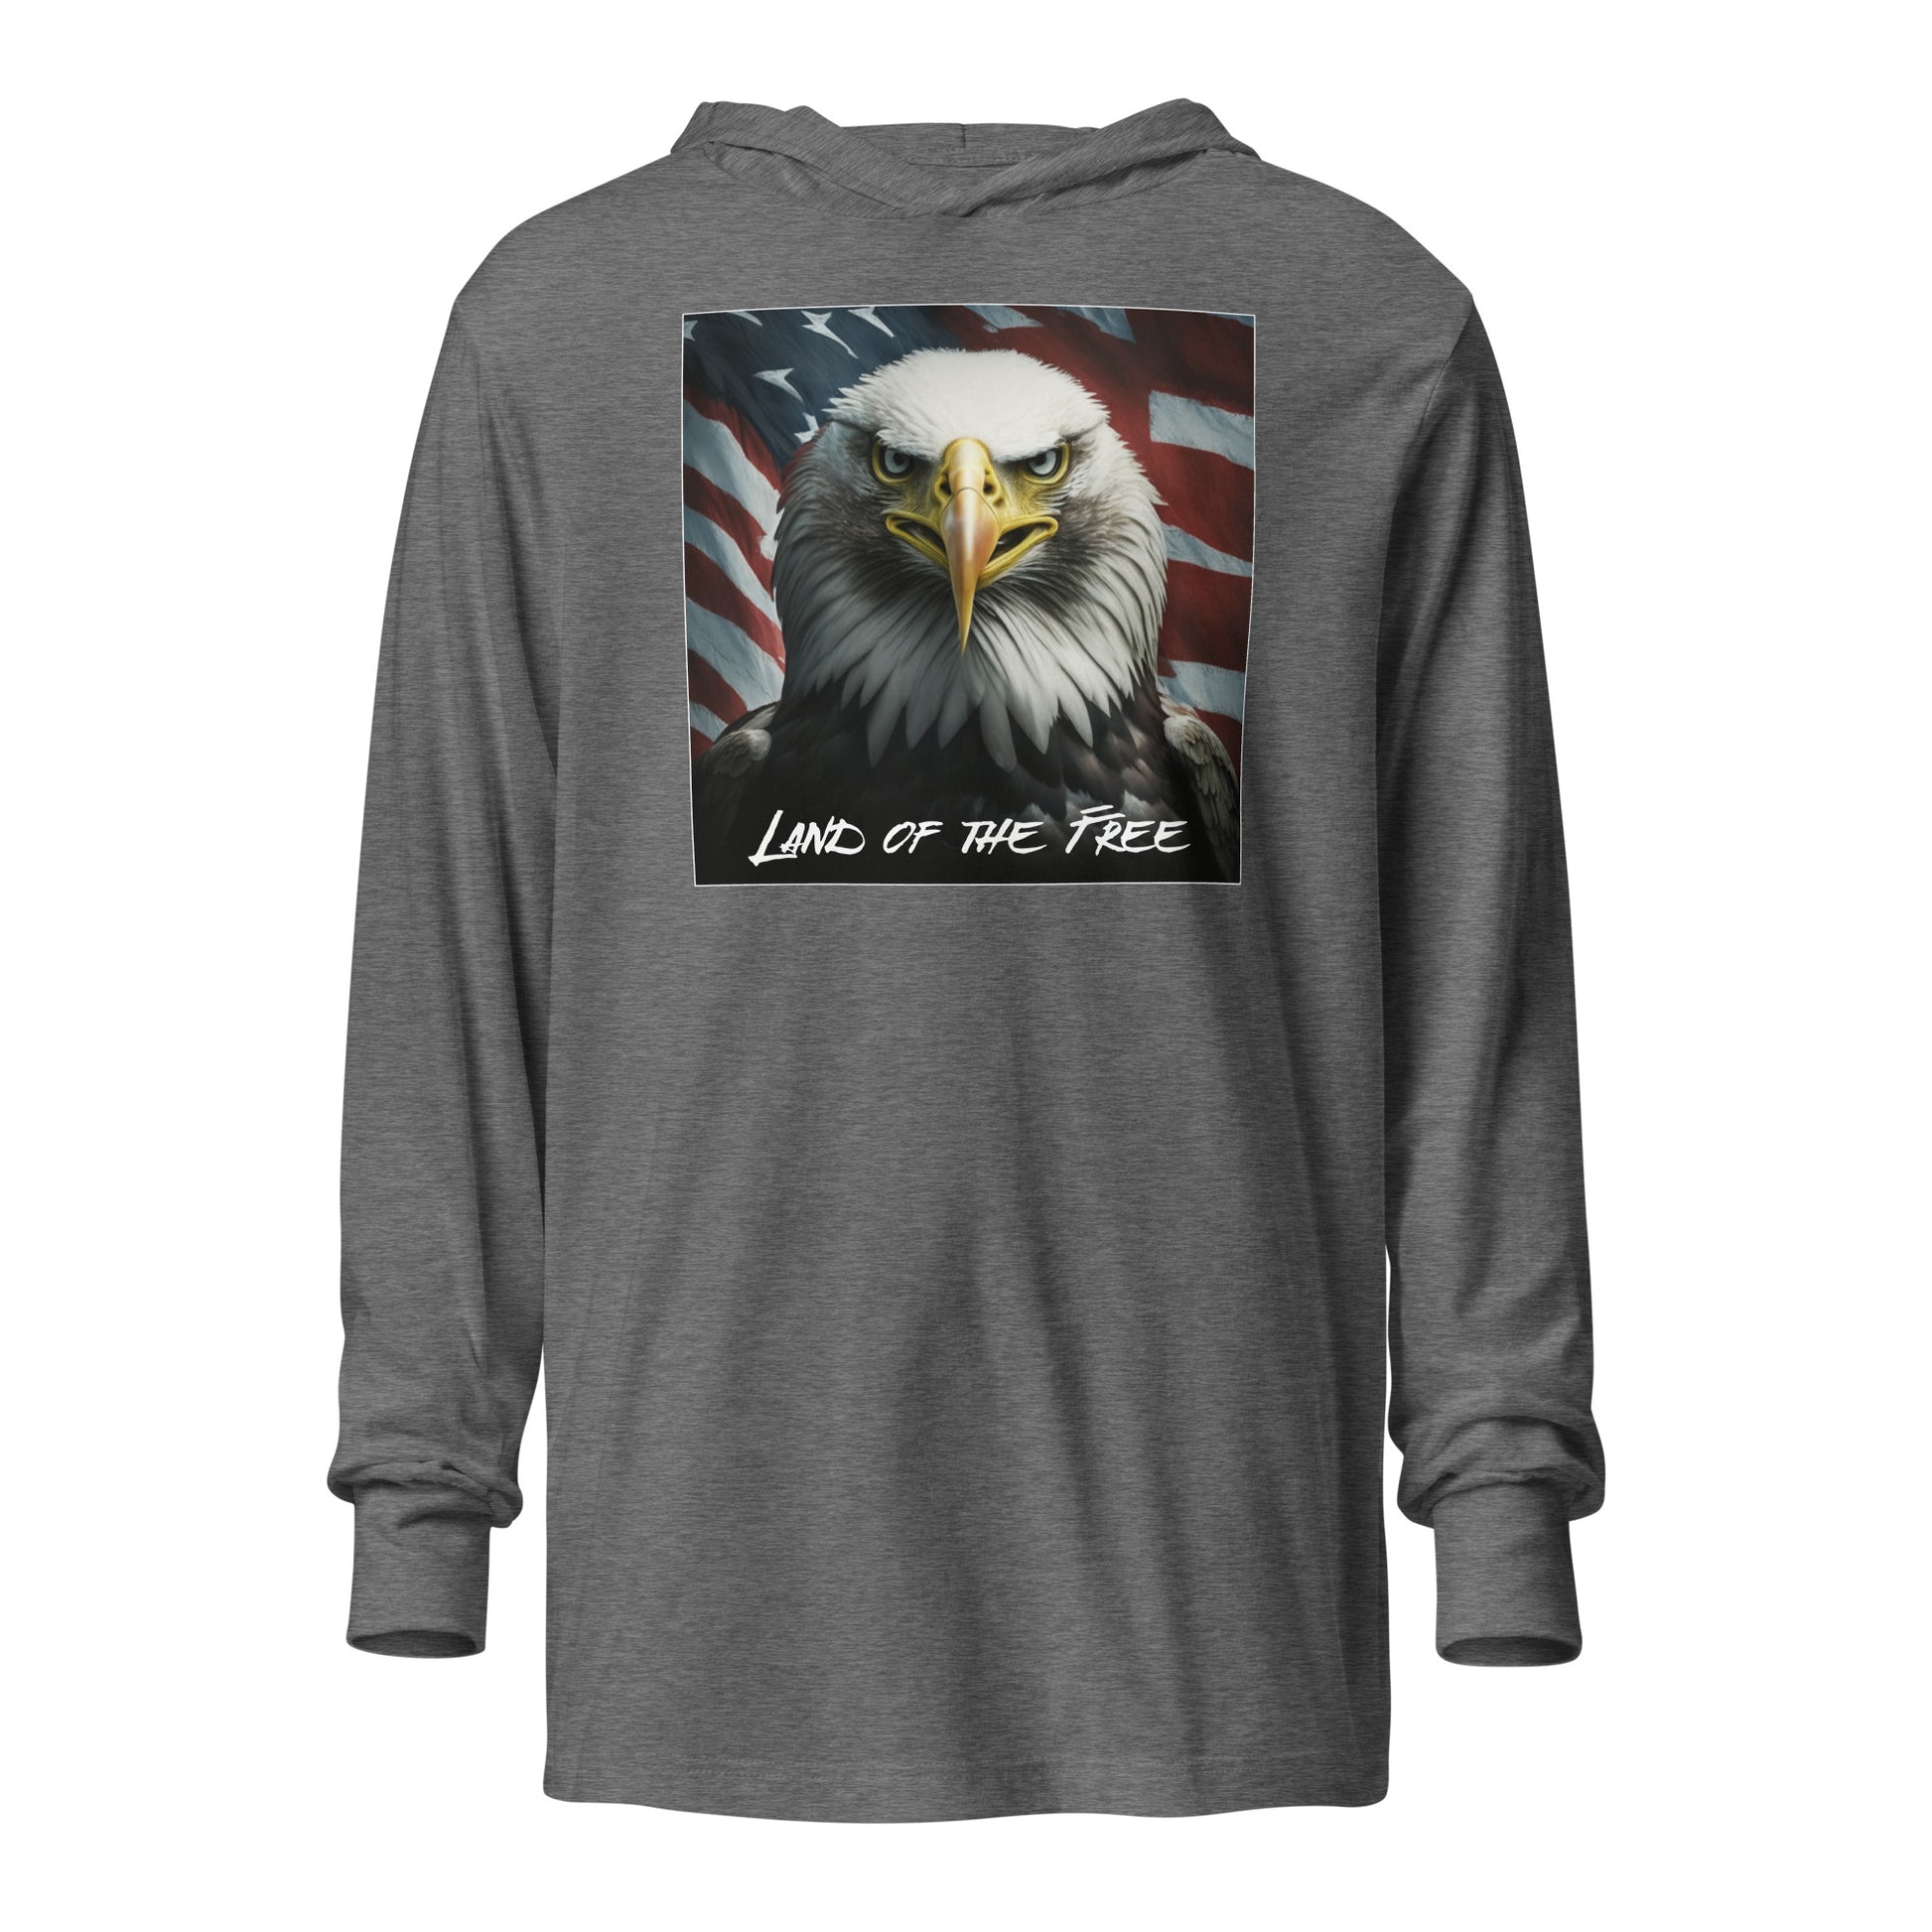 Land of the Free Hooded Long-Sleeve Tee Grey Triblend